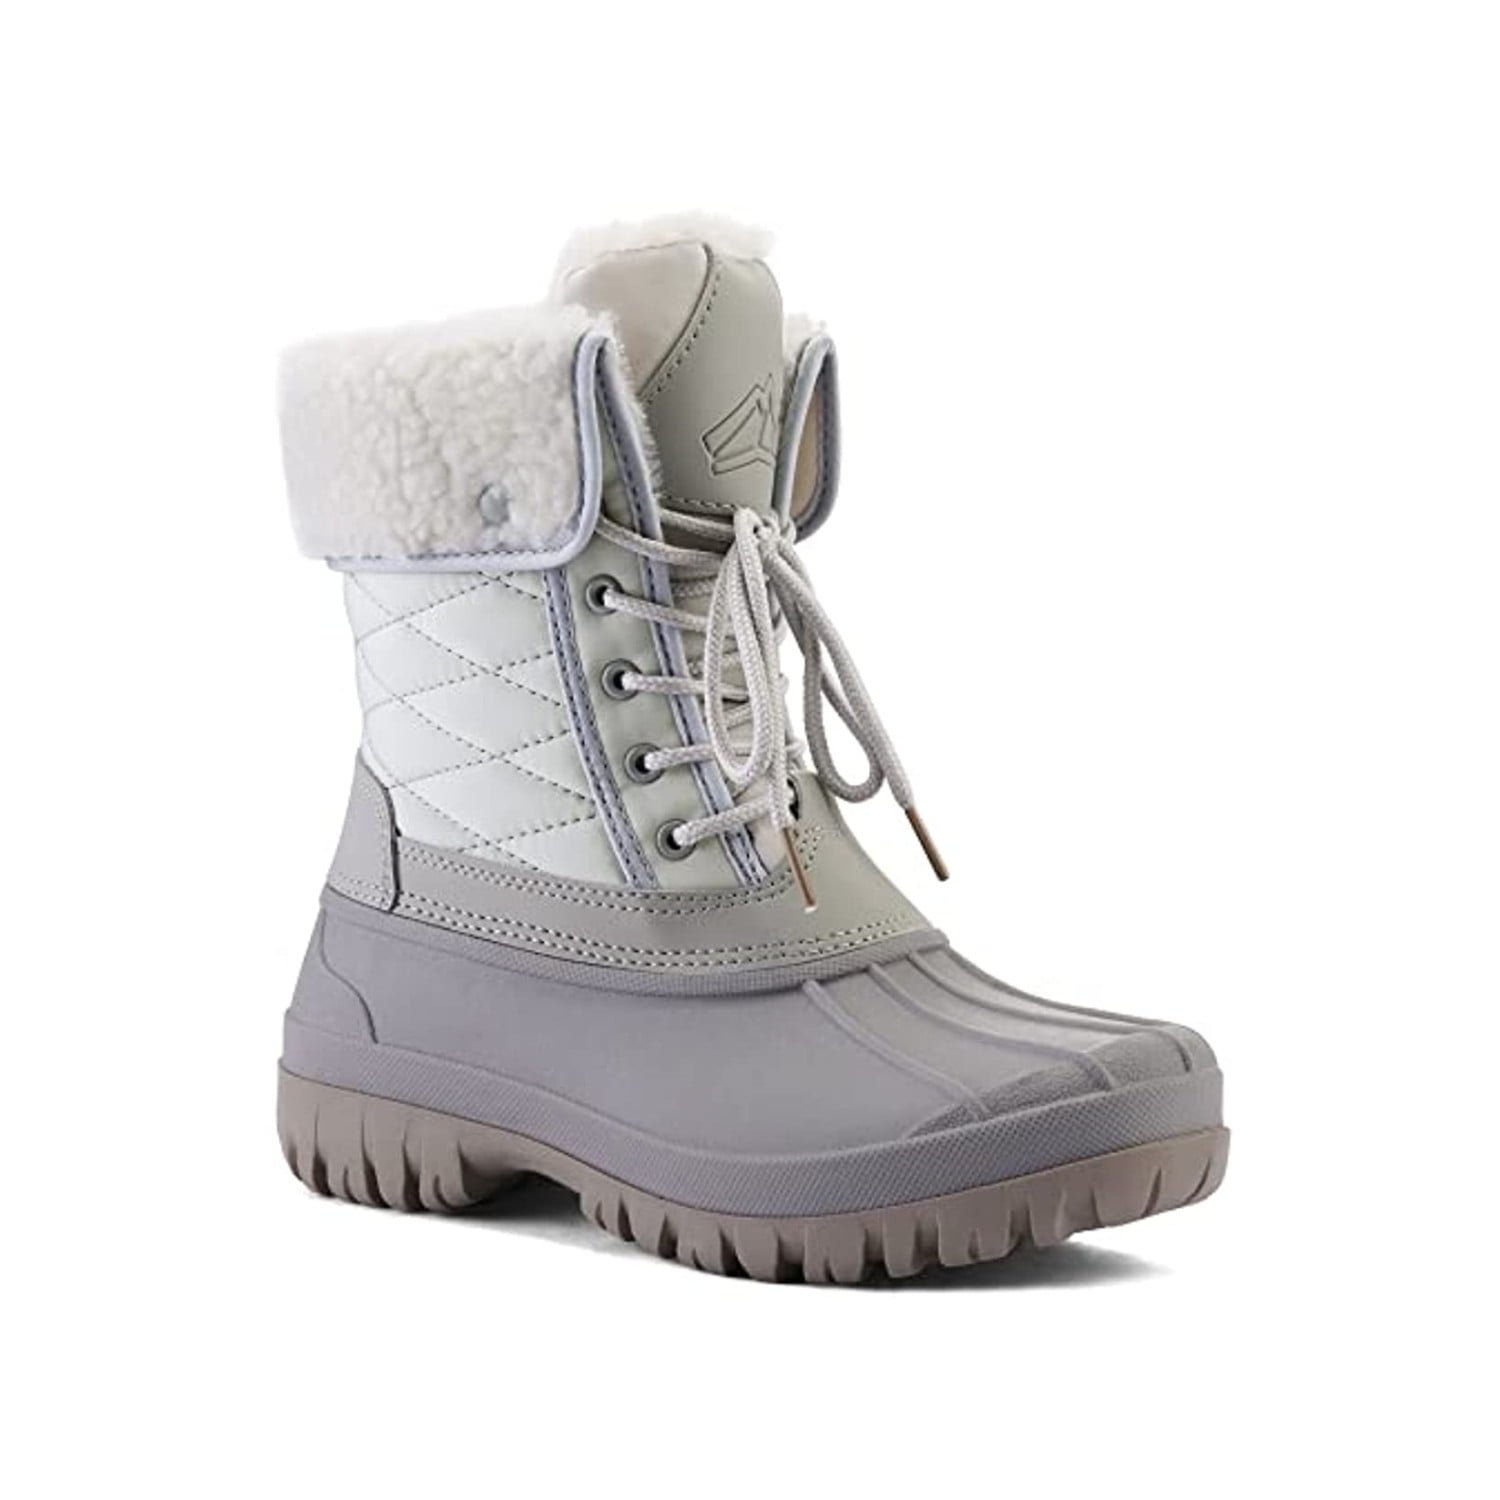 Up Boots, Winter 8 Womens Raheli2 US Hilfiger Lace Tommy Black,